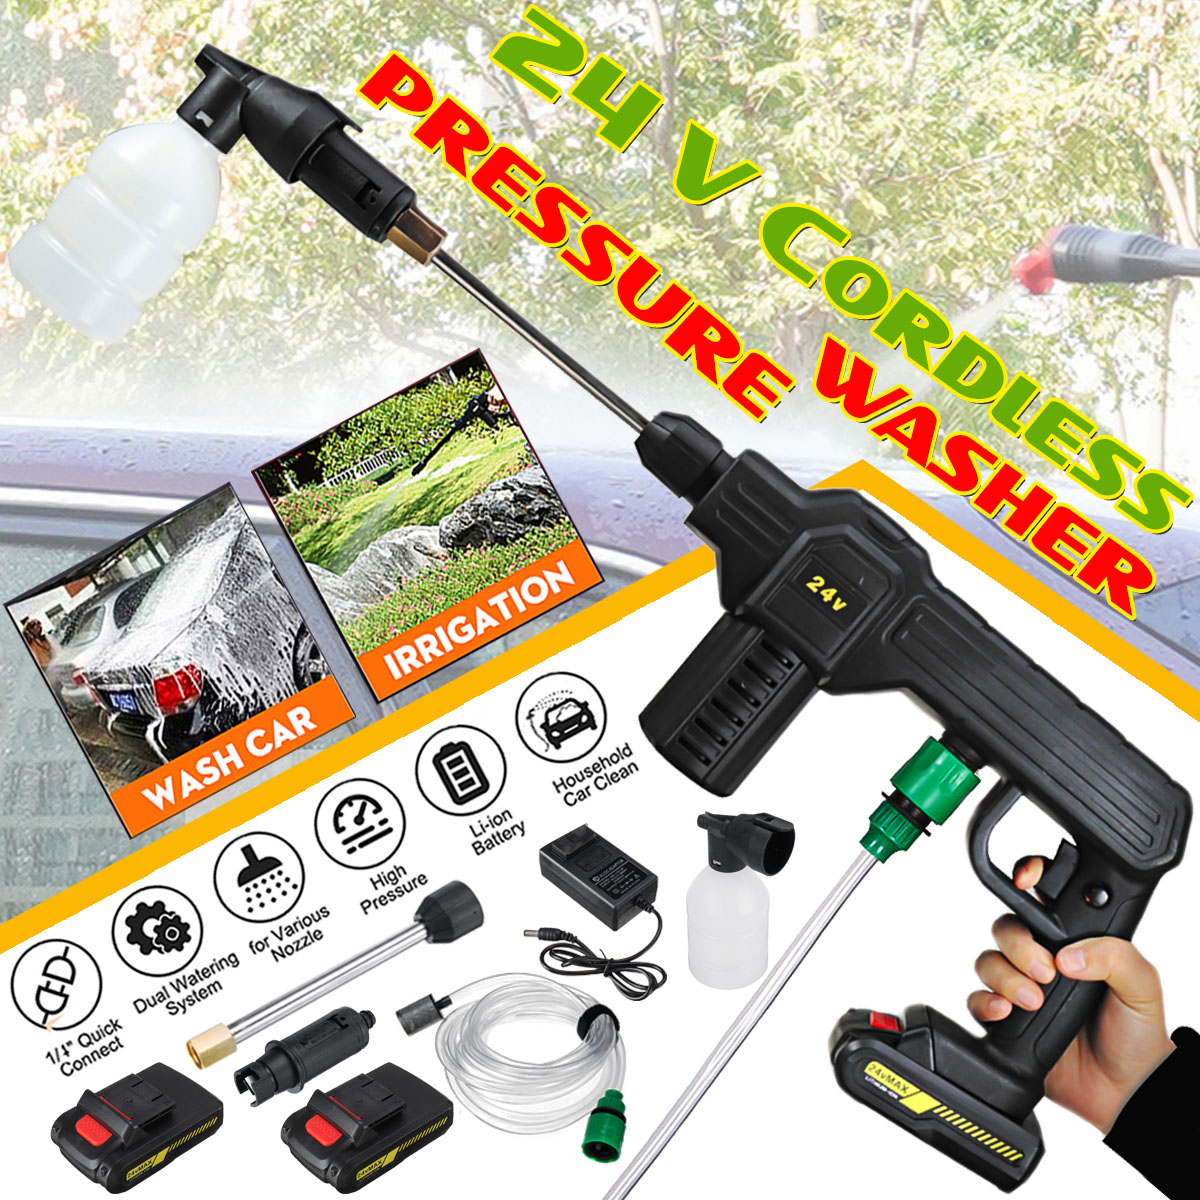 24V-Cordless-Power-Washer-Portable-Li-ion-Battery-Washer-Cleaner-Pressure-Washer-Cleaner-Electric-Pr-1829015-2